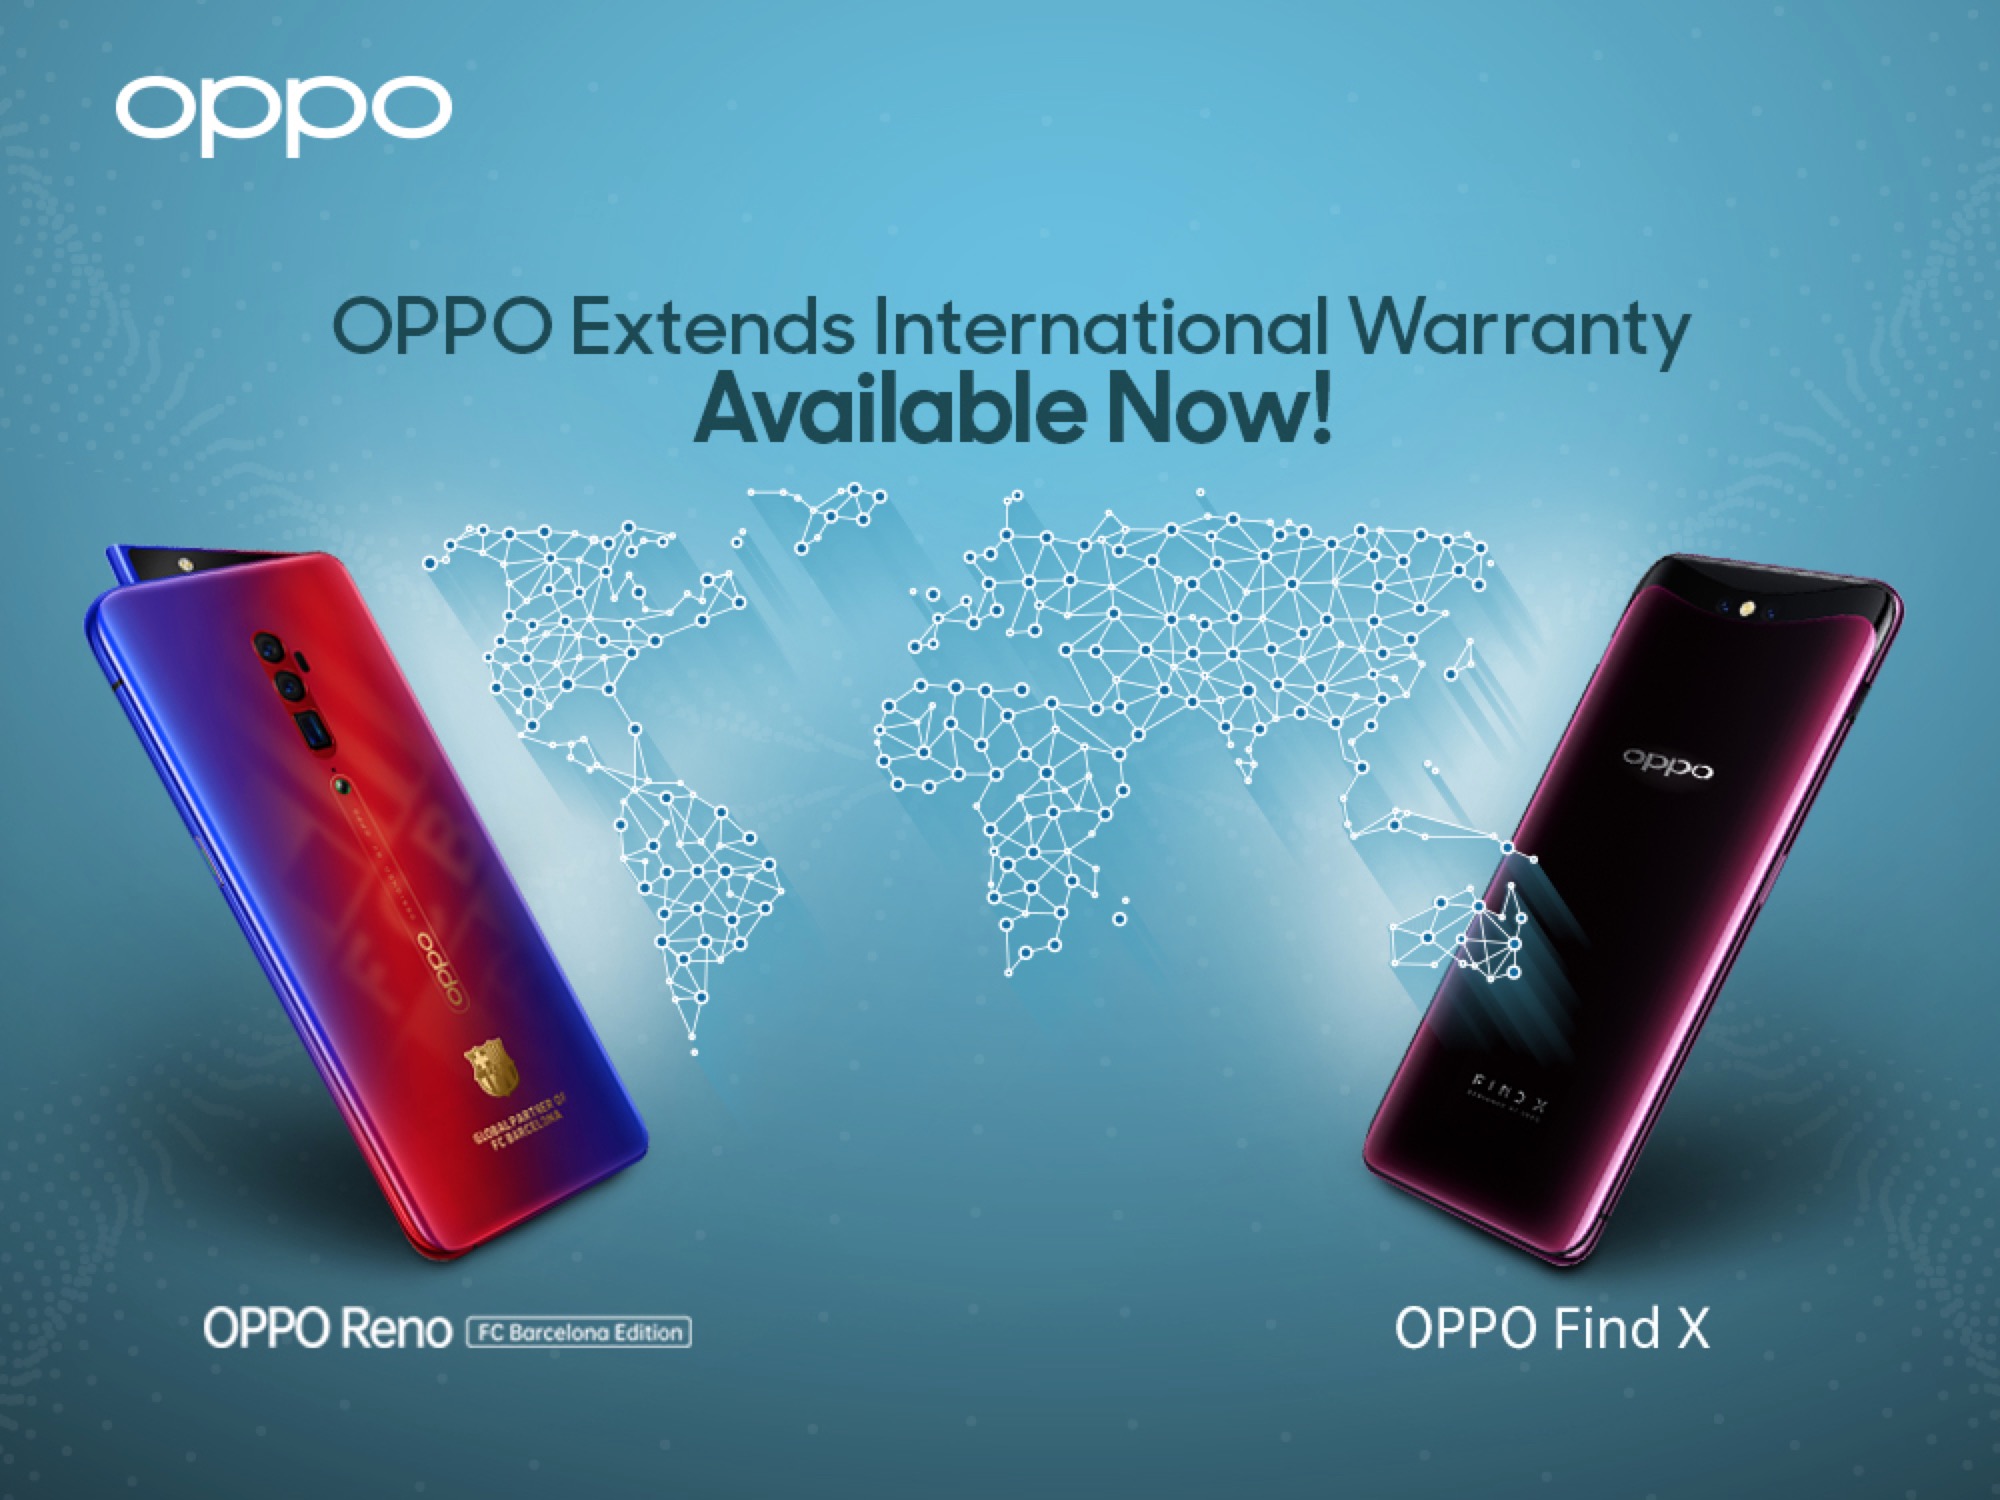 OPPO Extends International Warranty for Find X and recently launched Reno FC Barcelona Edition